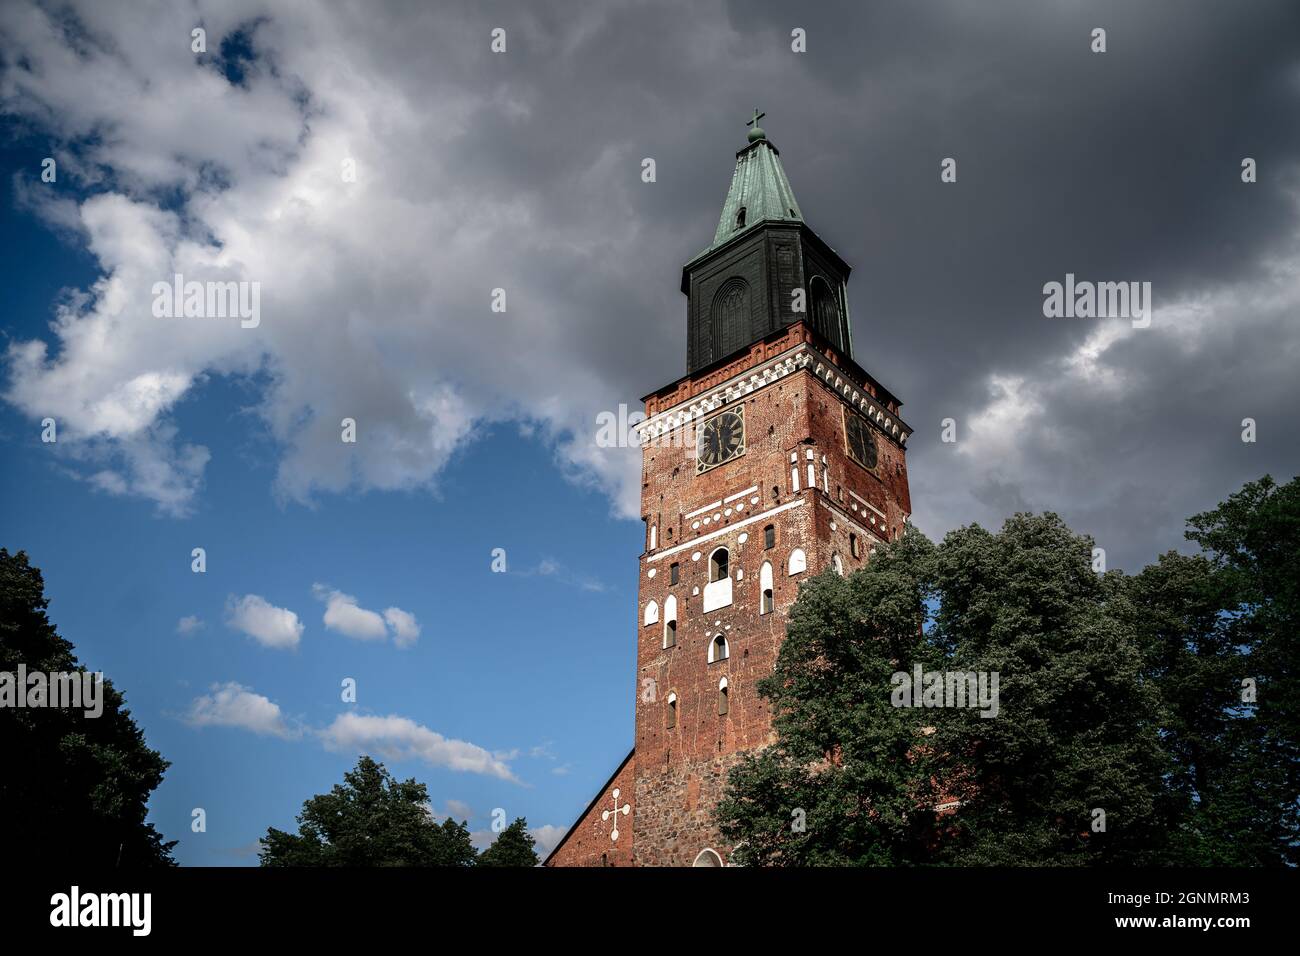 The beautiful architectural details of Turku Cathedral in Turku, Finland against a gloomy sky Stock Photo